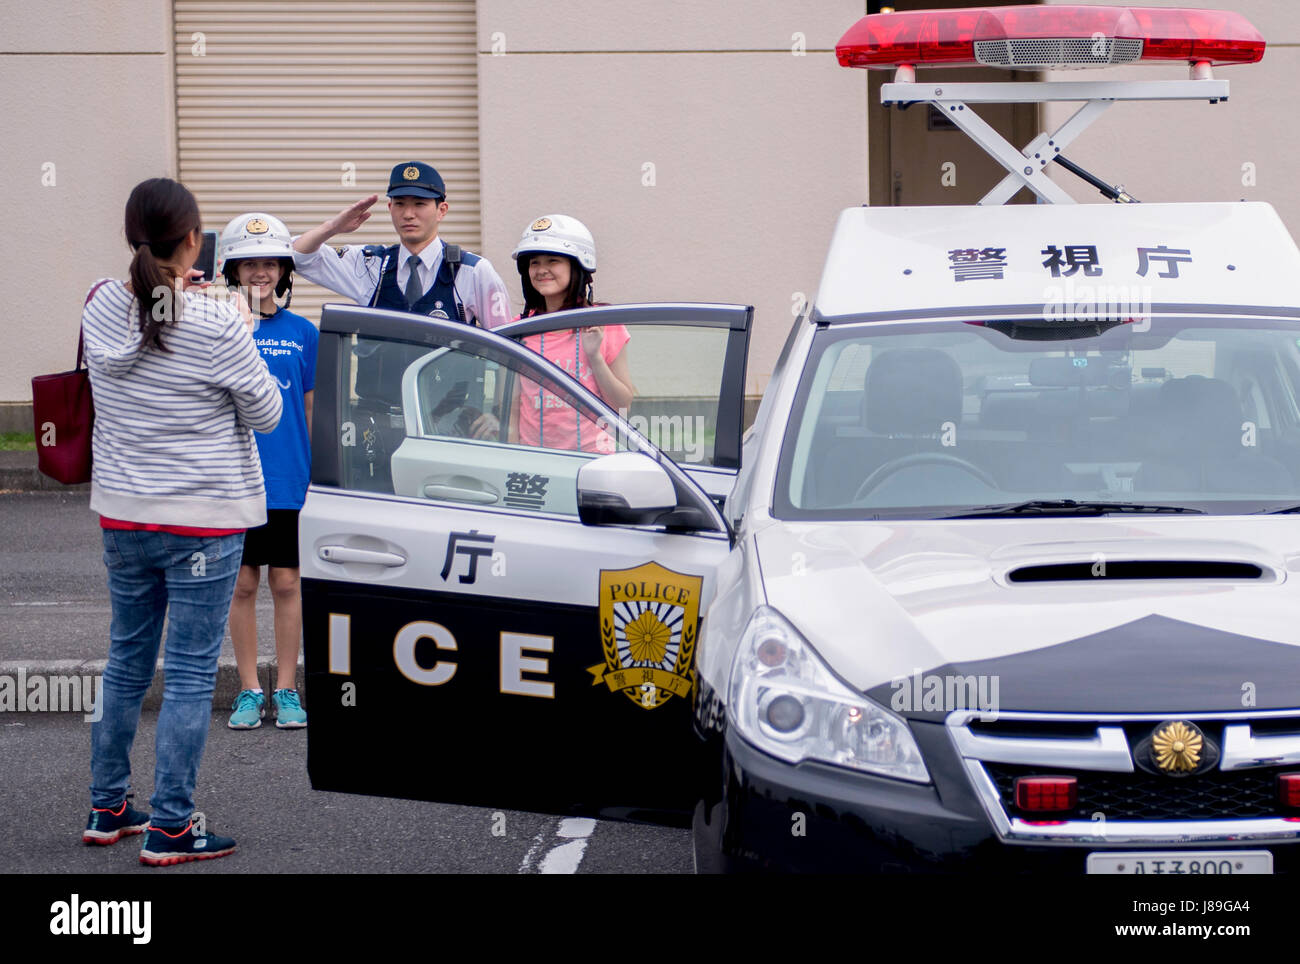 A family poses for photo with a Japanese police officer during a Police Week event, May 17, 2017, at Yokota Air Base, Japan. The event included various static displays from the Tokyo Police Department, Japan Air Self Defense Force, 374th Security Forces Squadron and U.S. Office of Special Investigations. (U.S. Air Force photo by Airman 1st Class Donald Hudson) Stock Photo